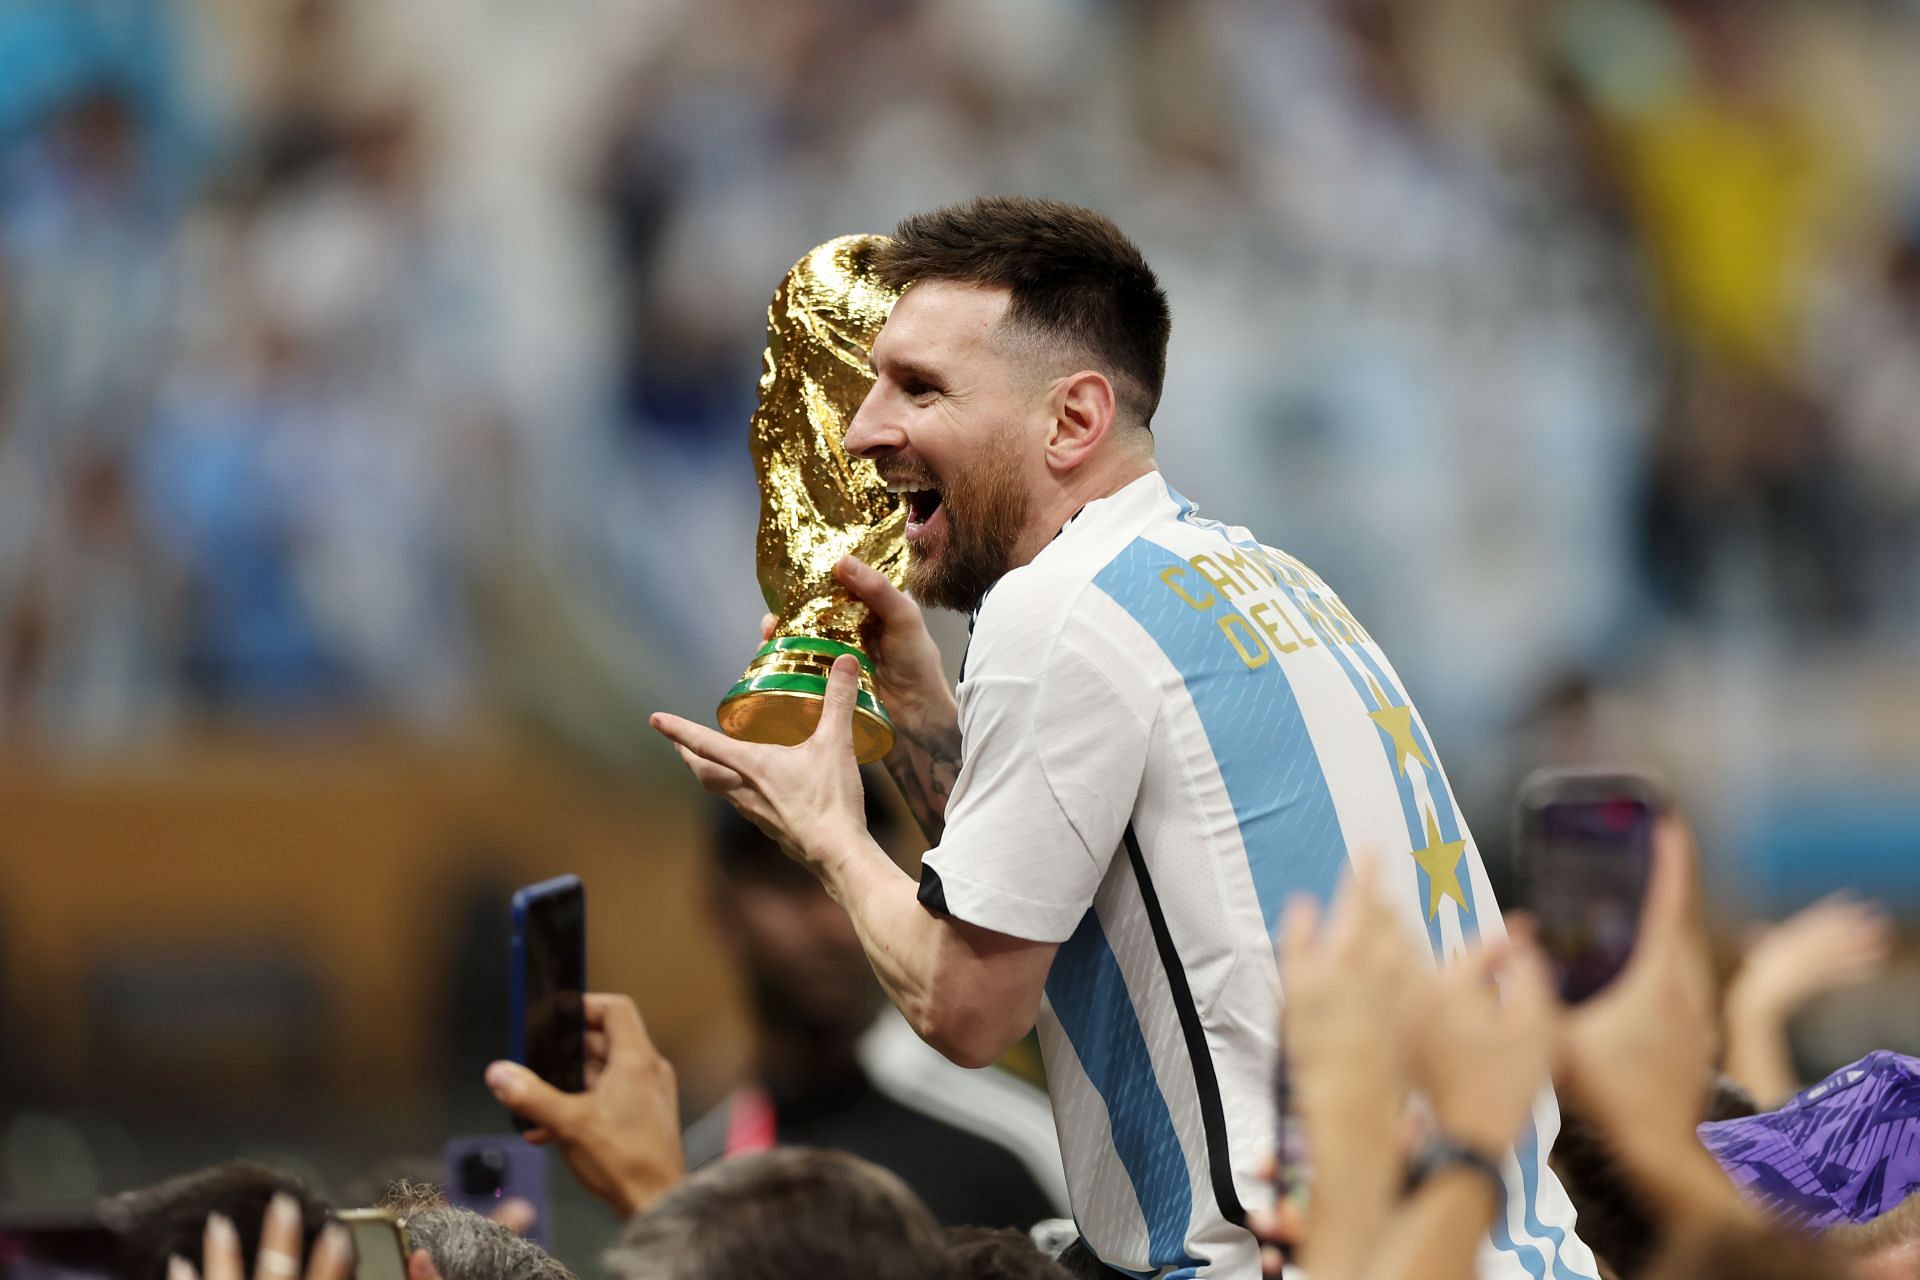 Lionel Messi finally emulated Diego Maradona by lifting the World Cup.